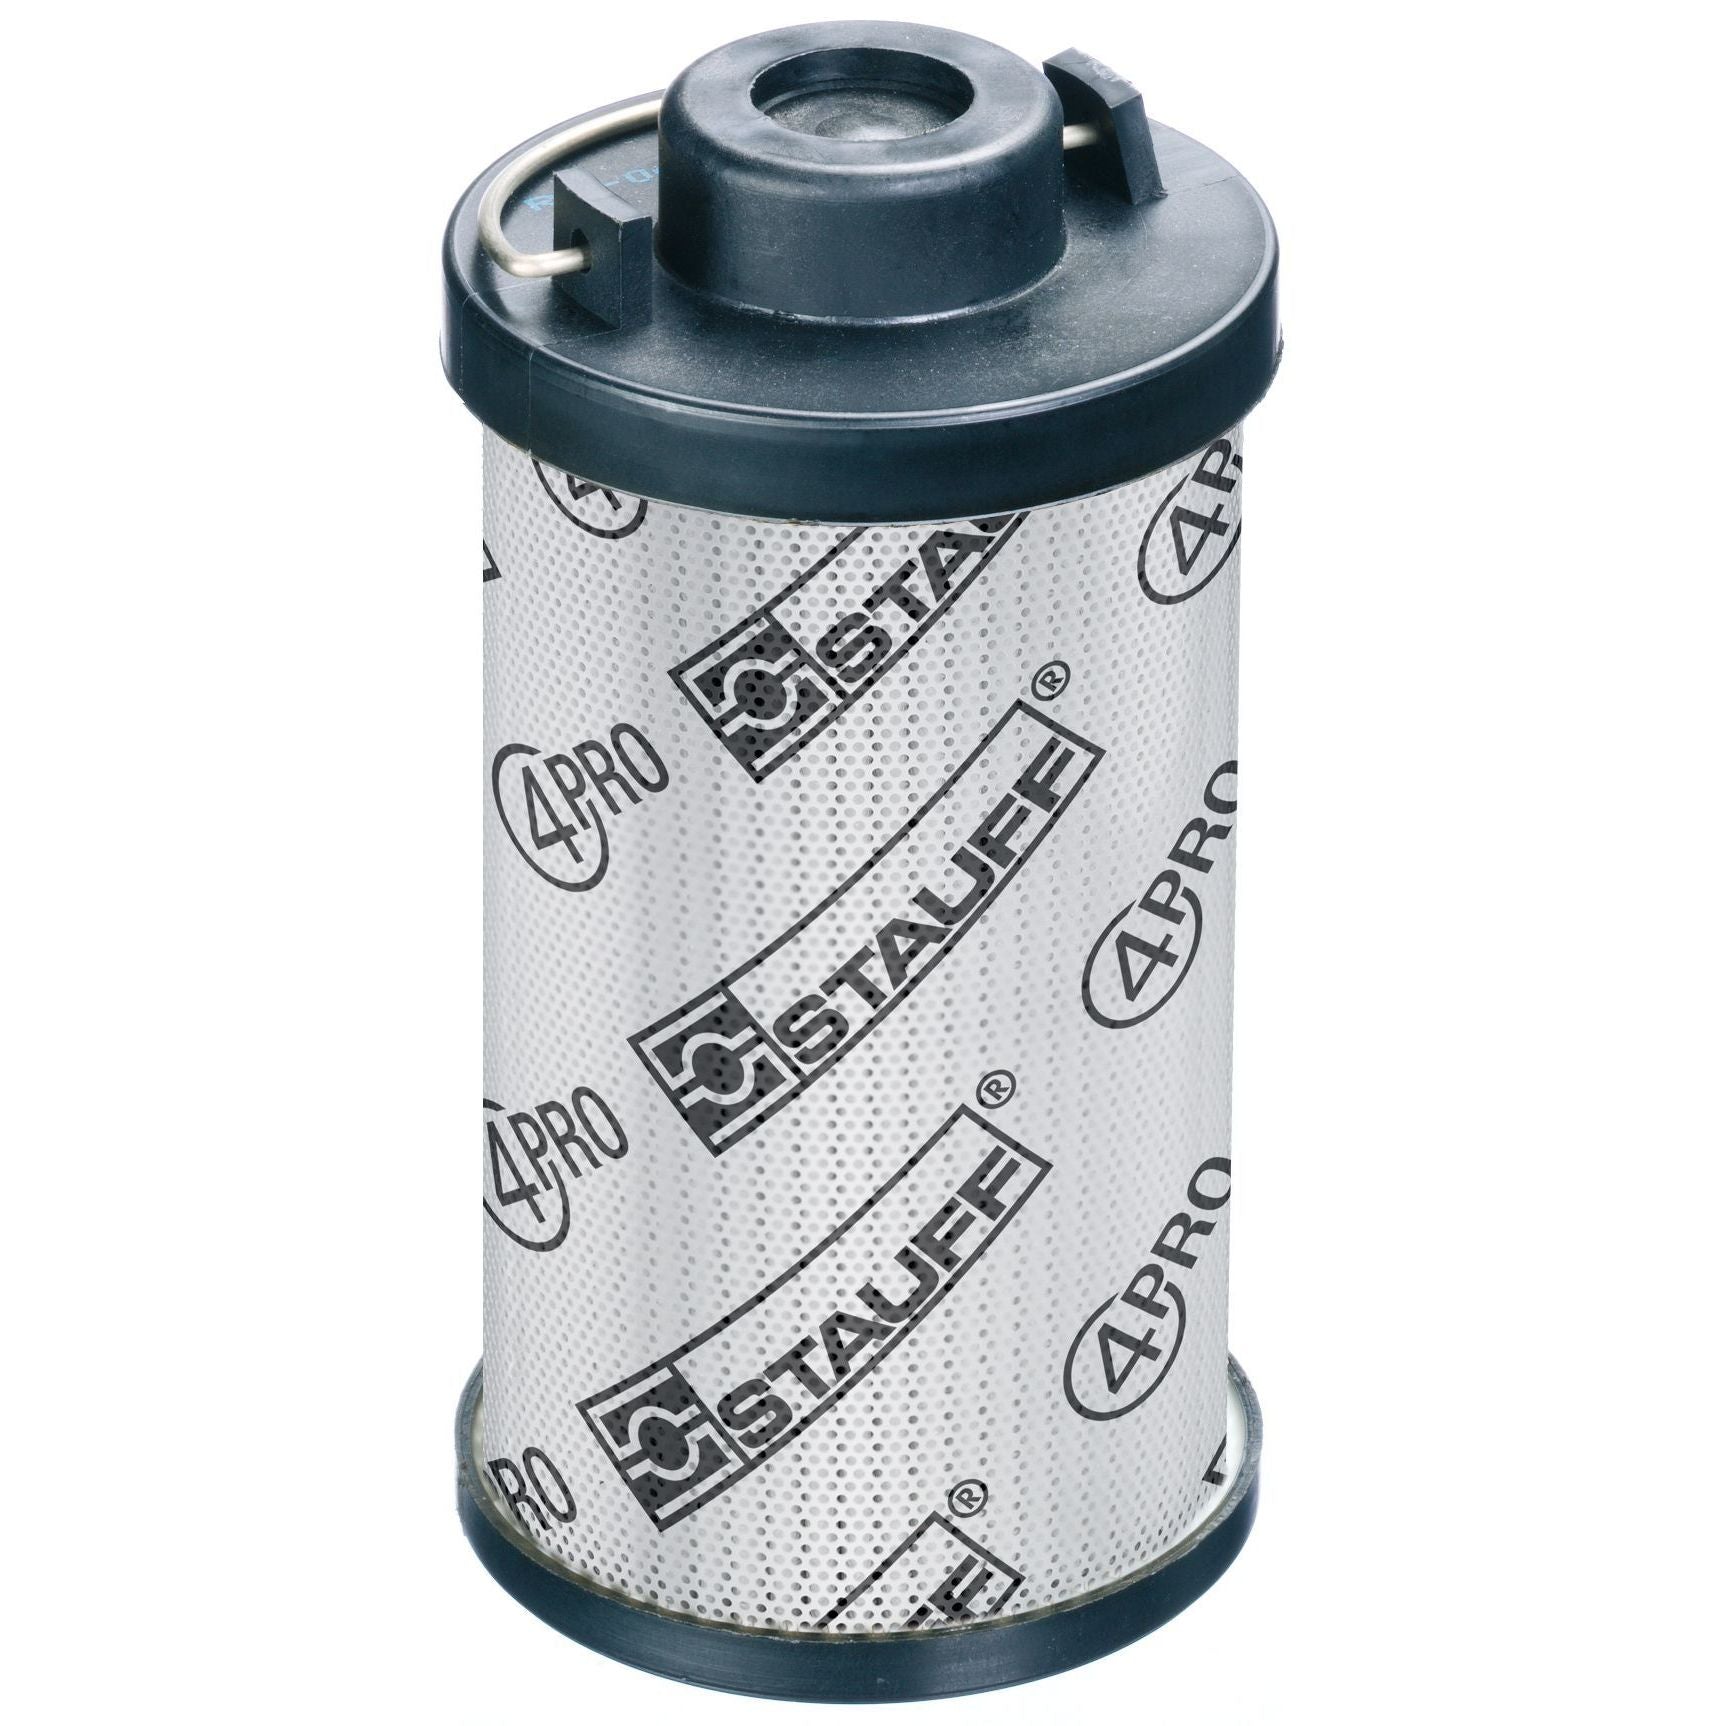 RE-300-G-20-V/5 : Stauff RF-300 Series Filter Element, 20 Micron, Synthetic, 363psi Collapse Differential, Viton Seals